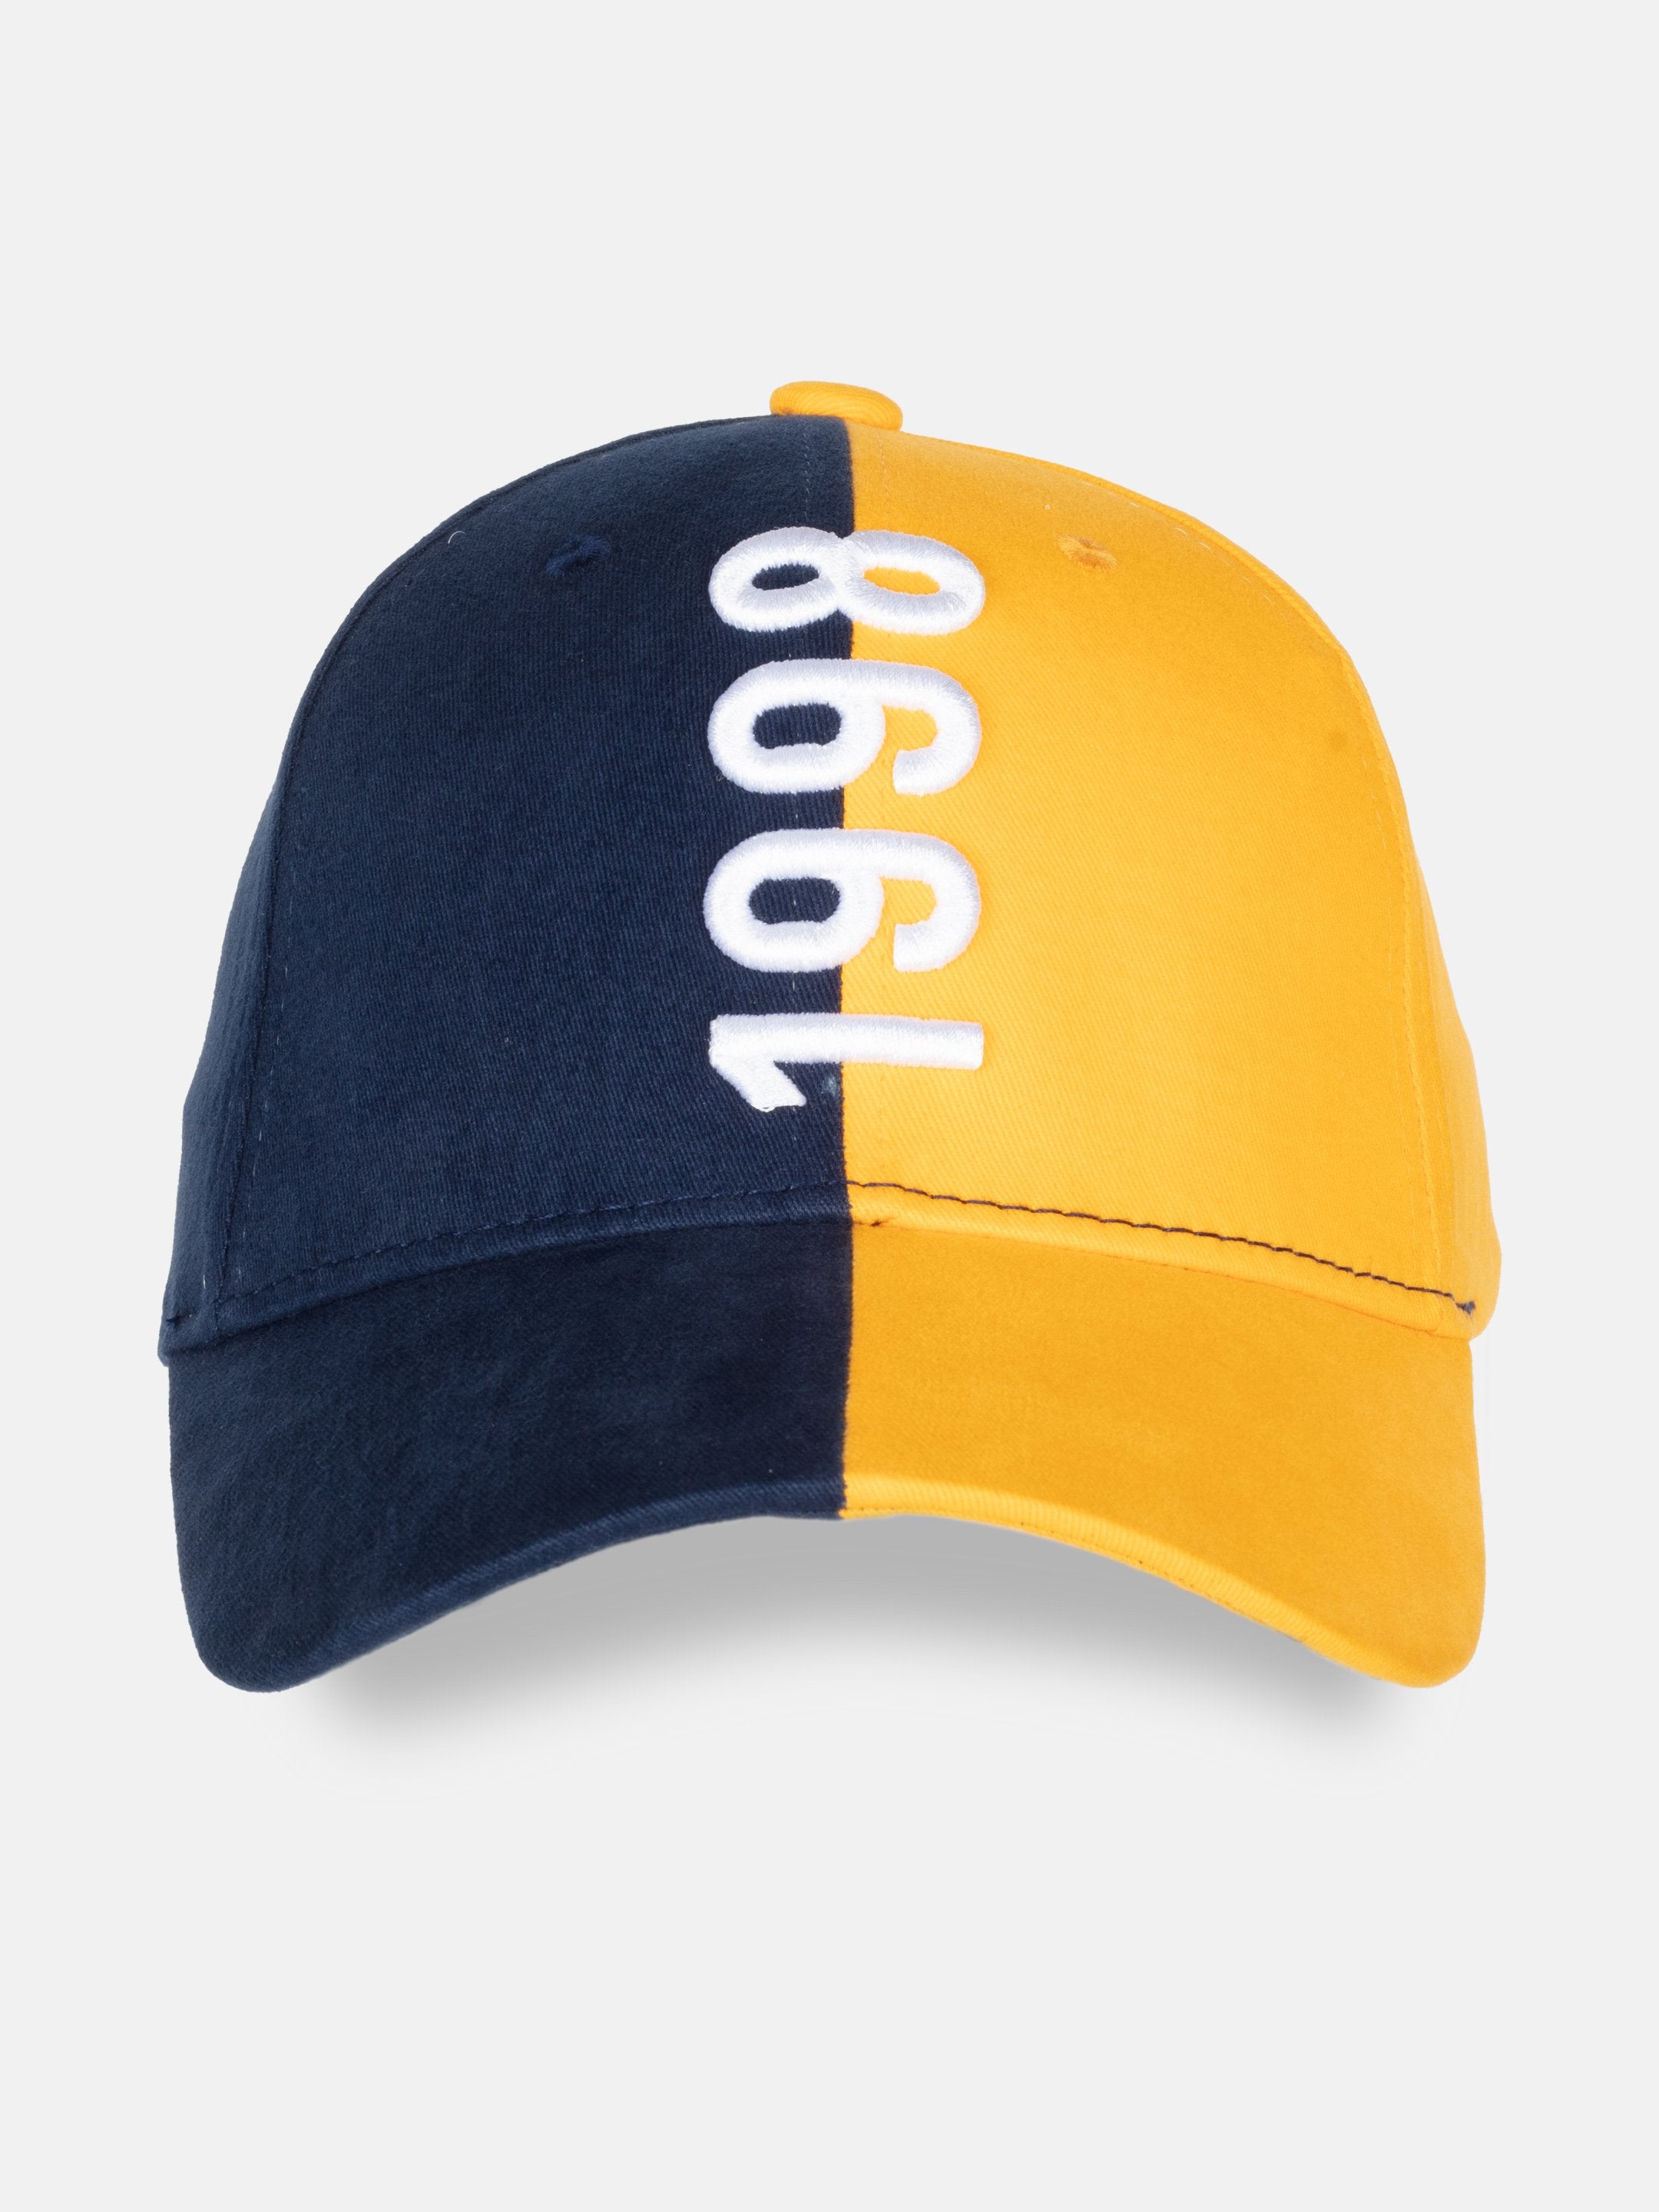 Yellow/Navy Embroidered Cap